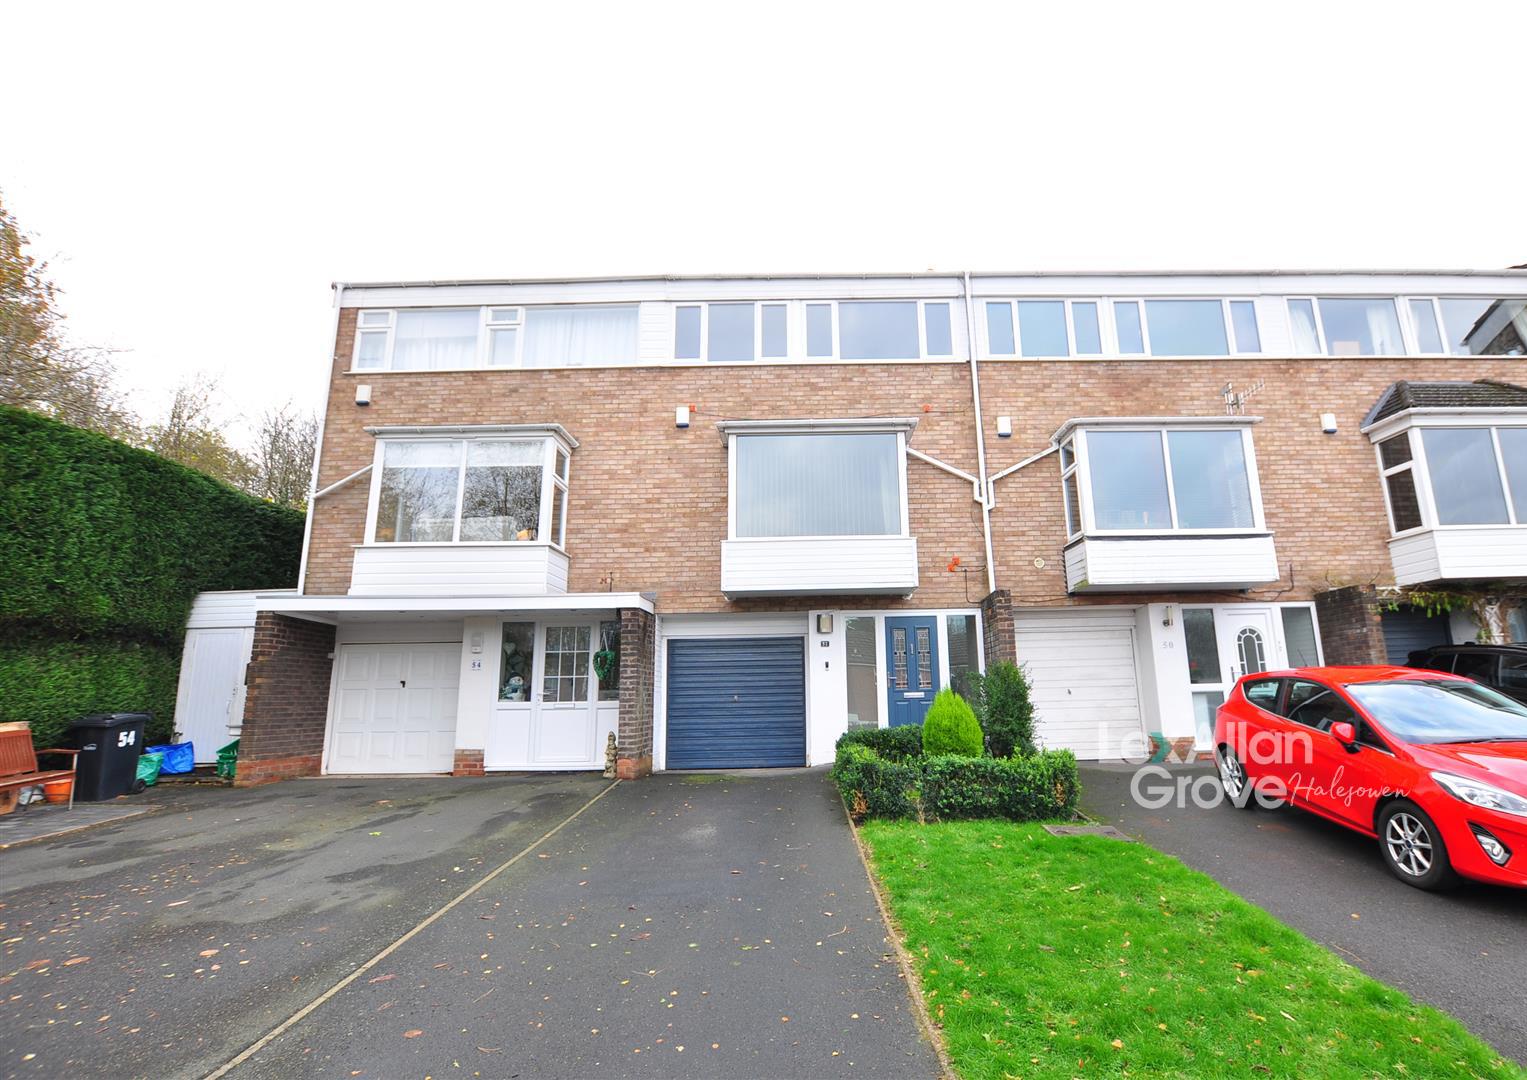 3 bed town house for sale in Iverley Road, Halesowen 0